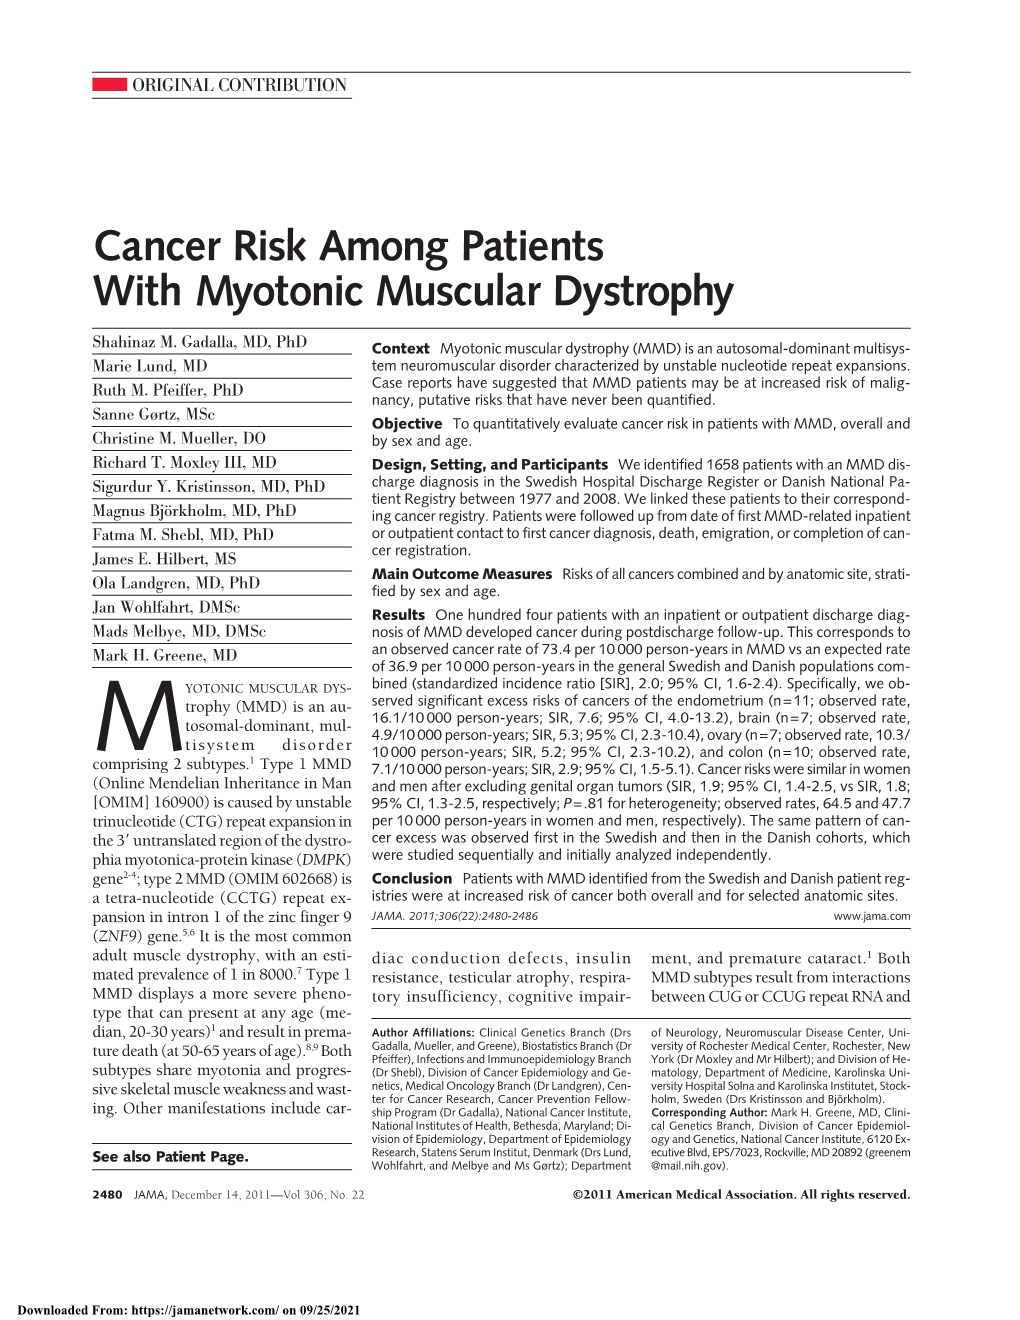 Cancer Risk Among Patients with Myotonic Muscular Dystrophy